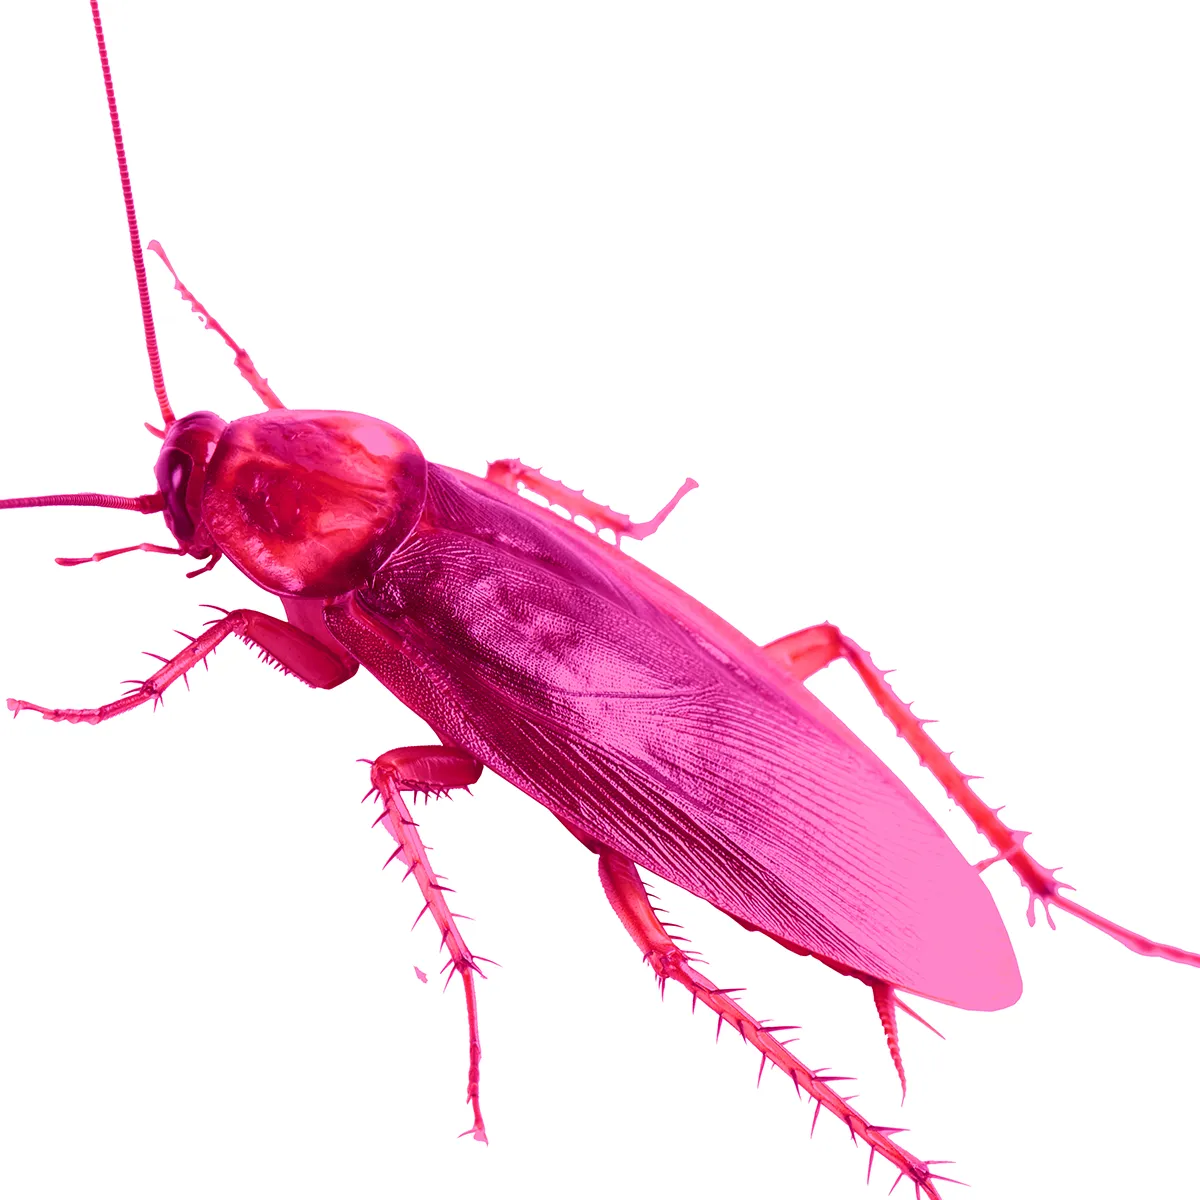 Print from contemporary artist Vladimir Tsesler - Pink Plastic Cockroach. For sale.